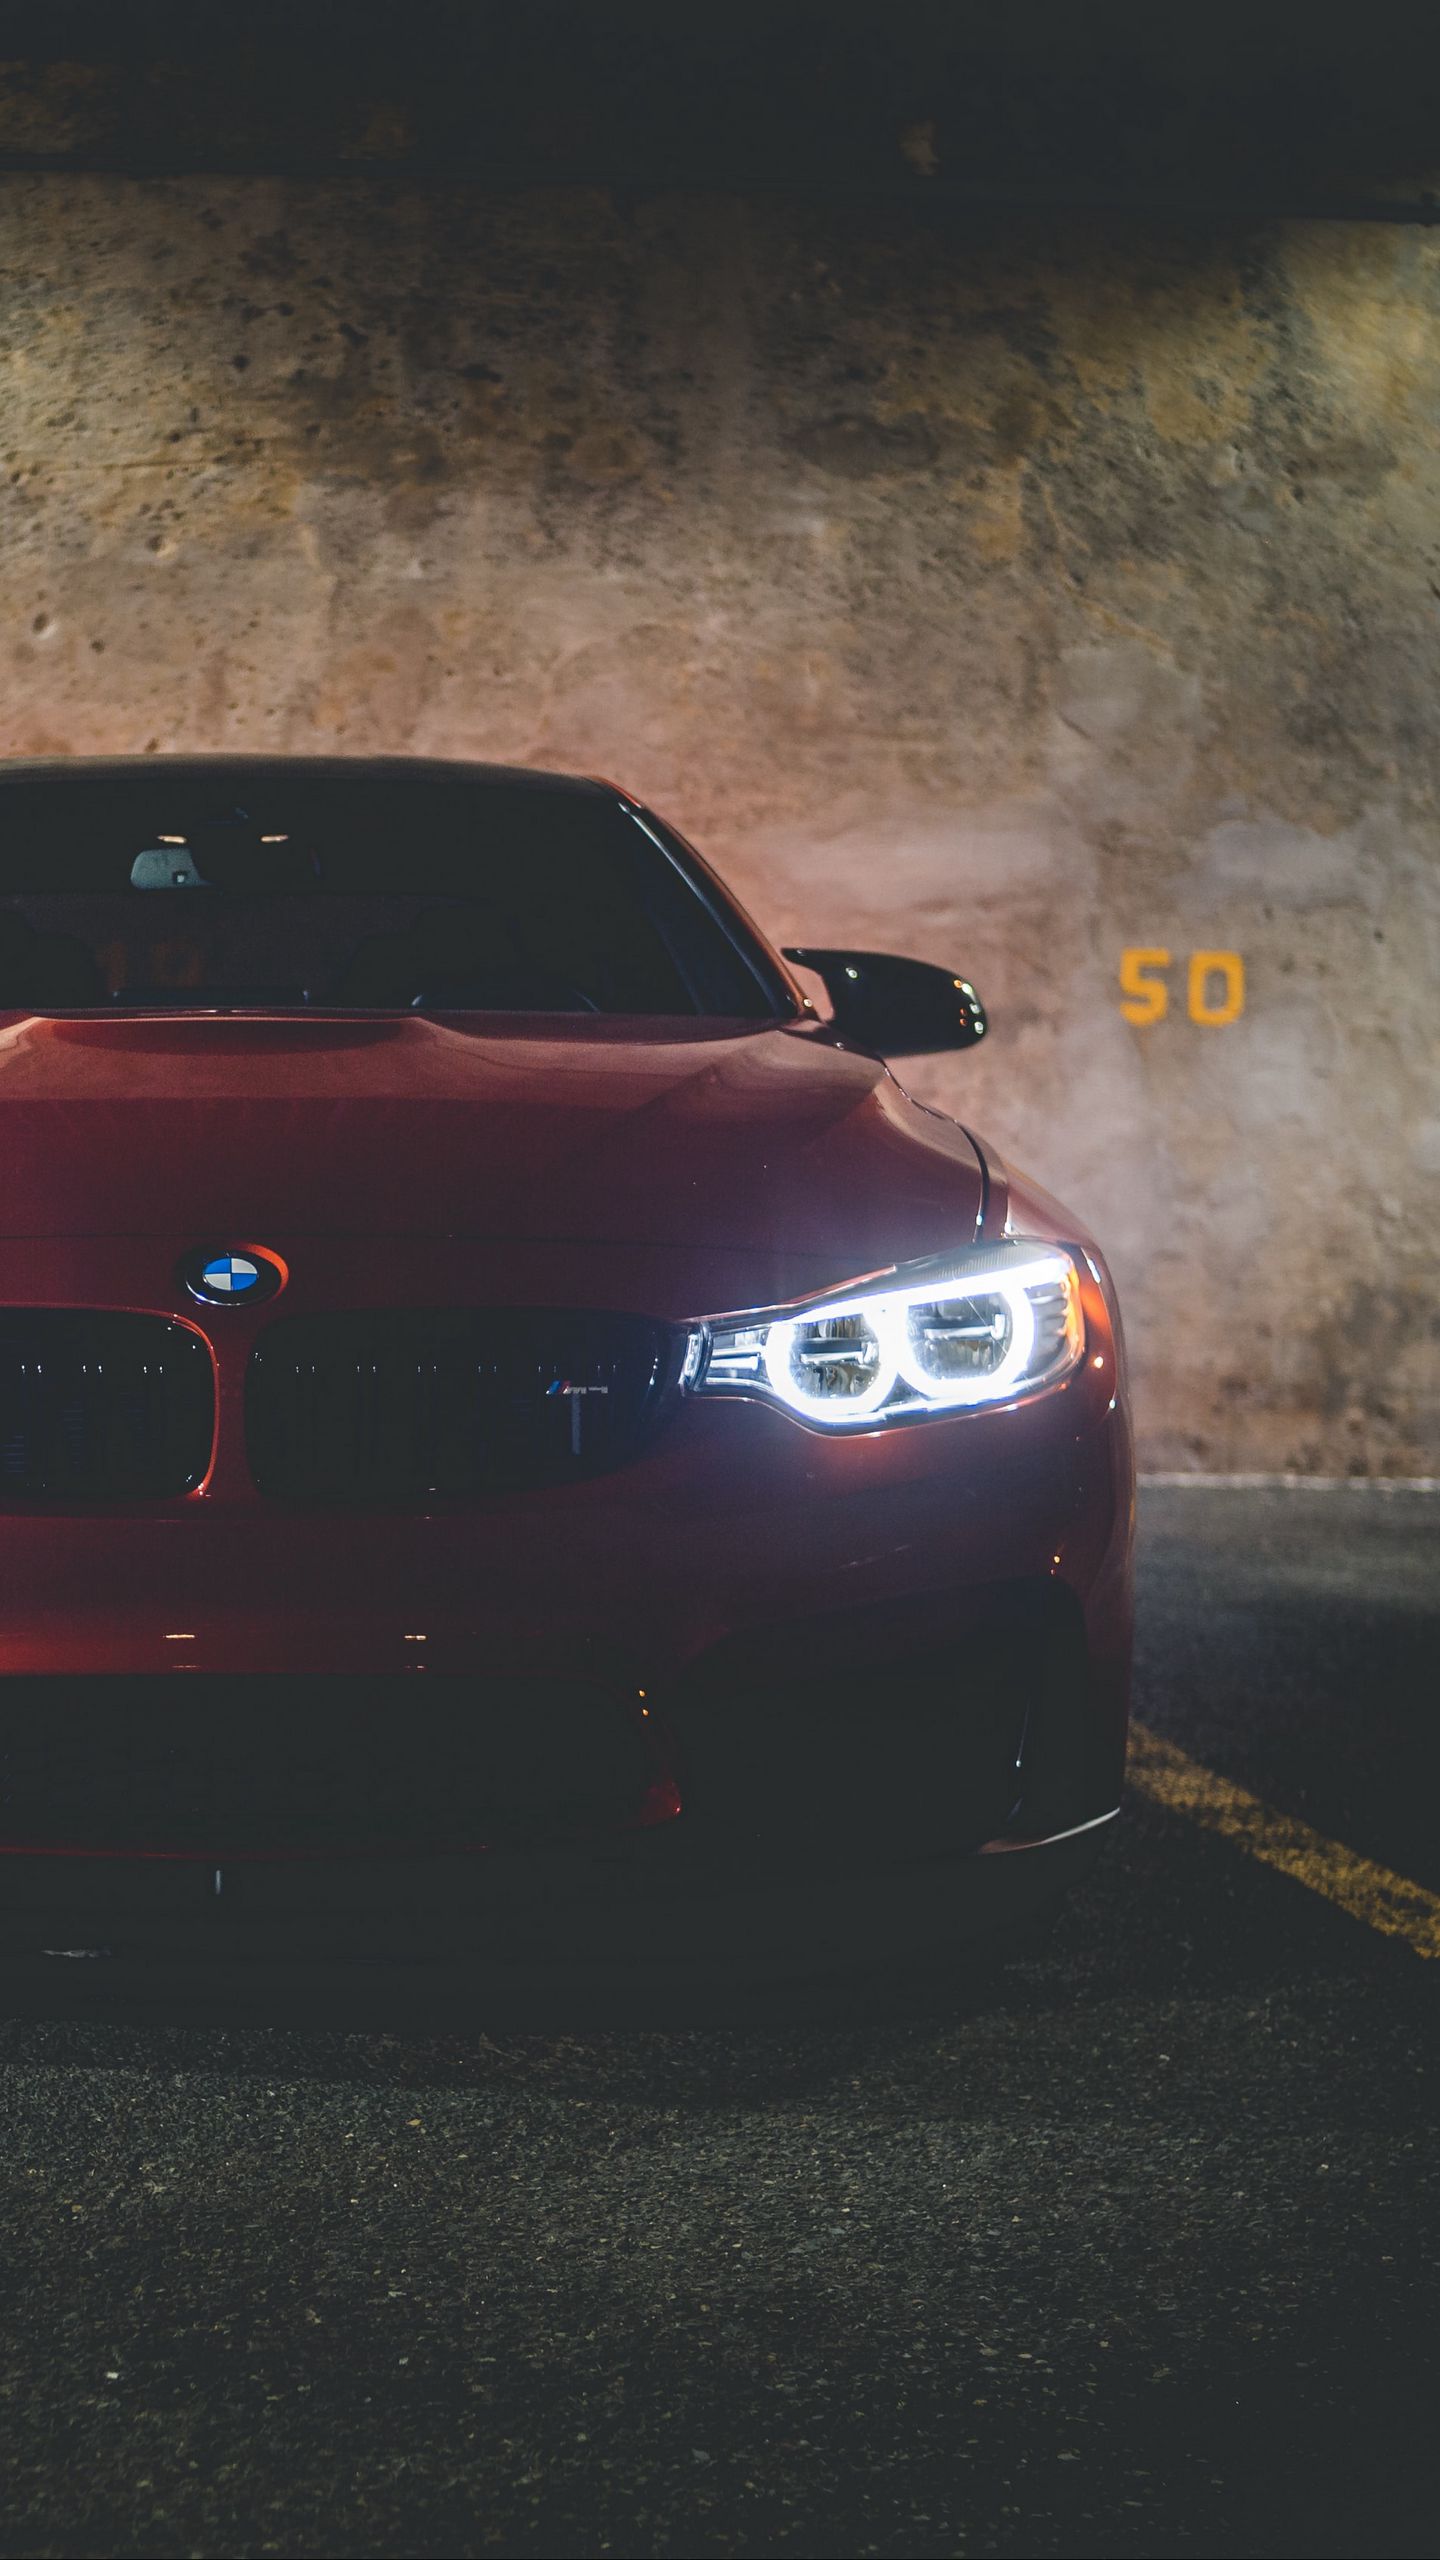 Download Wallpaper 1440x2560 Bmw 3i Bmw Car Front View Red Qhd Samsung Galaxy S6 S7 Edge Note Lg G4 Hd Background